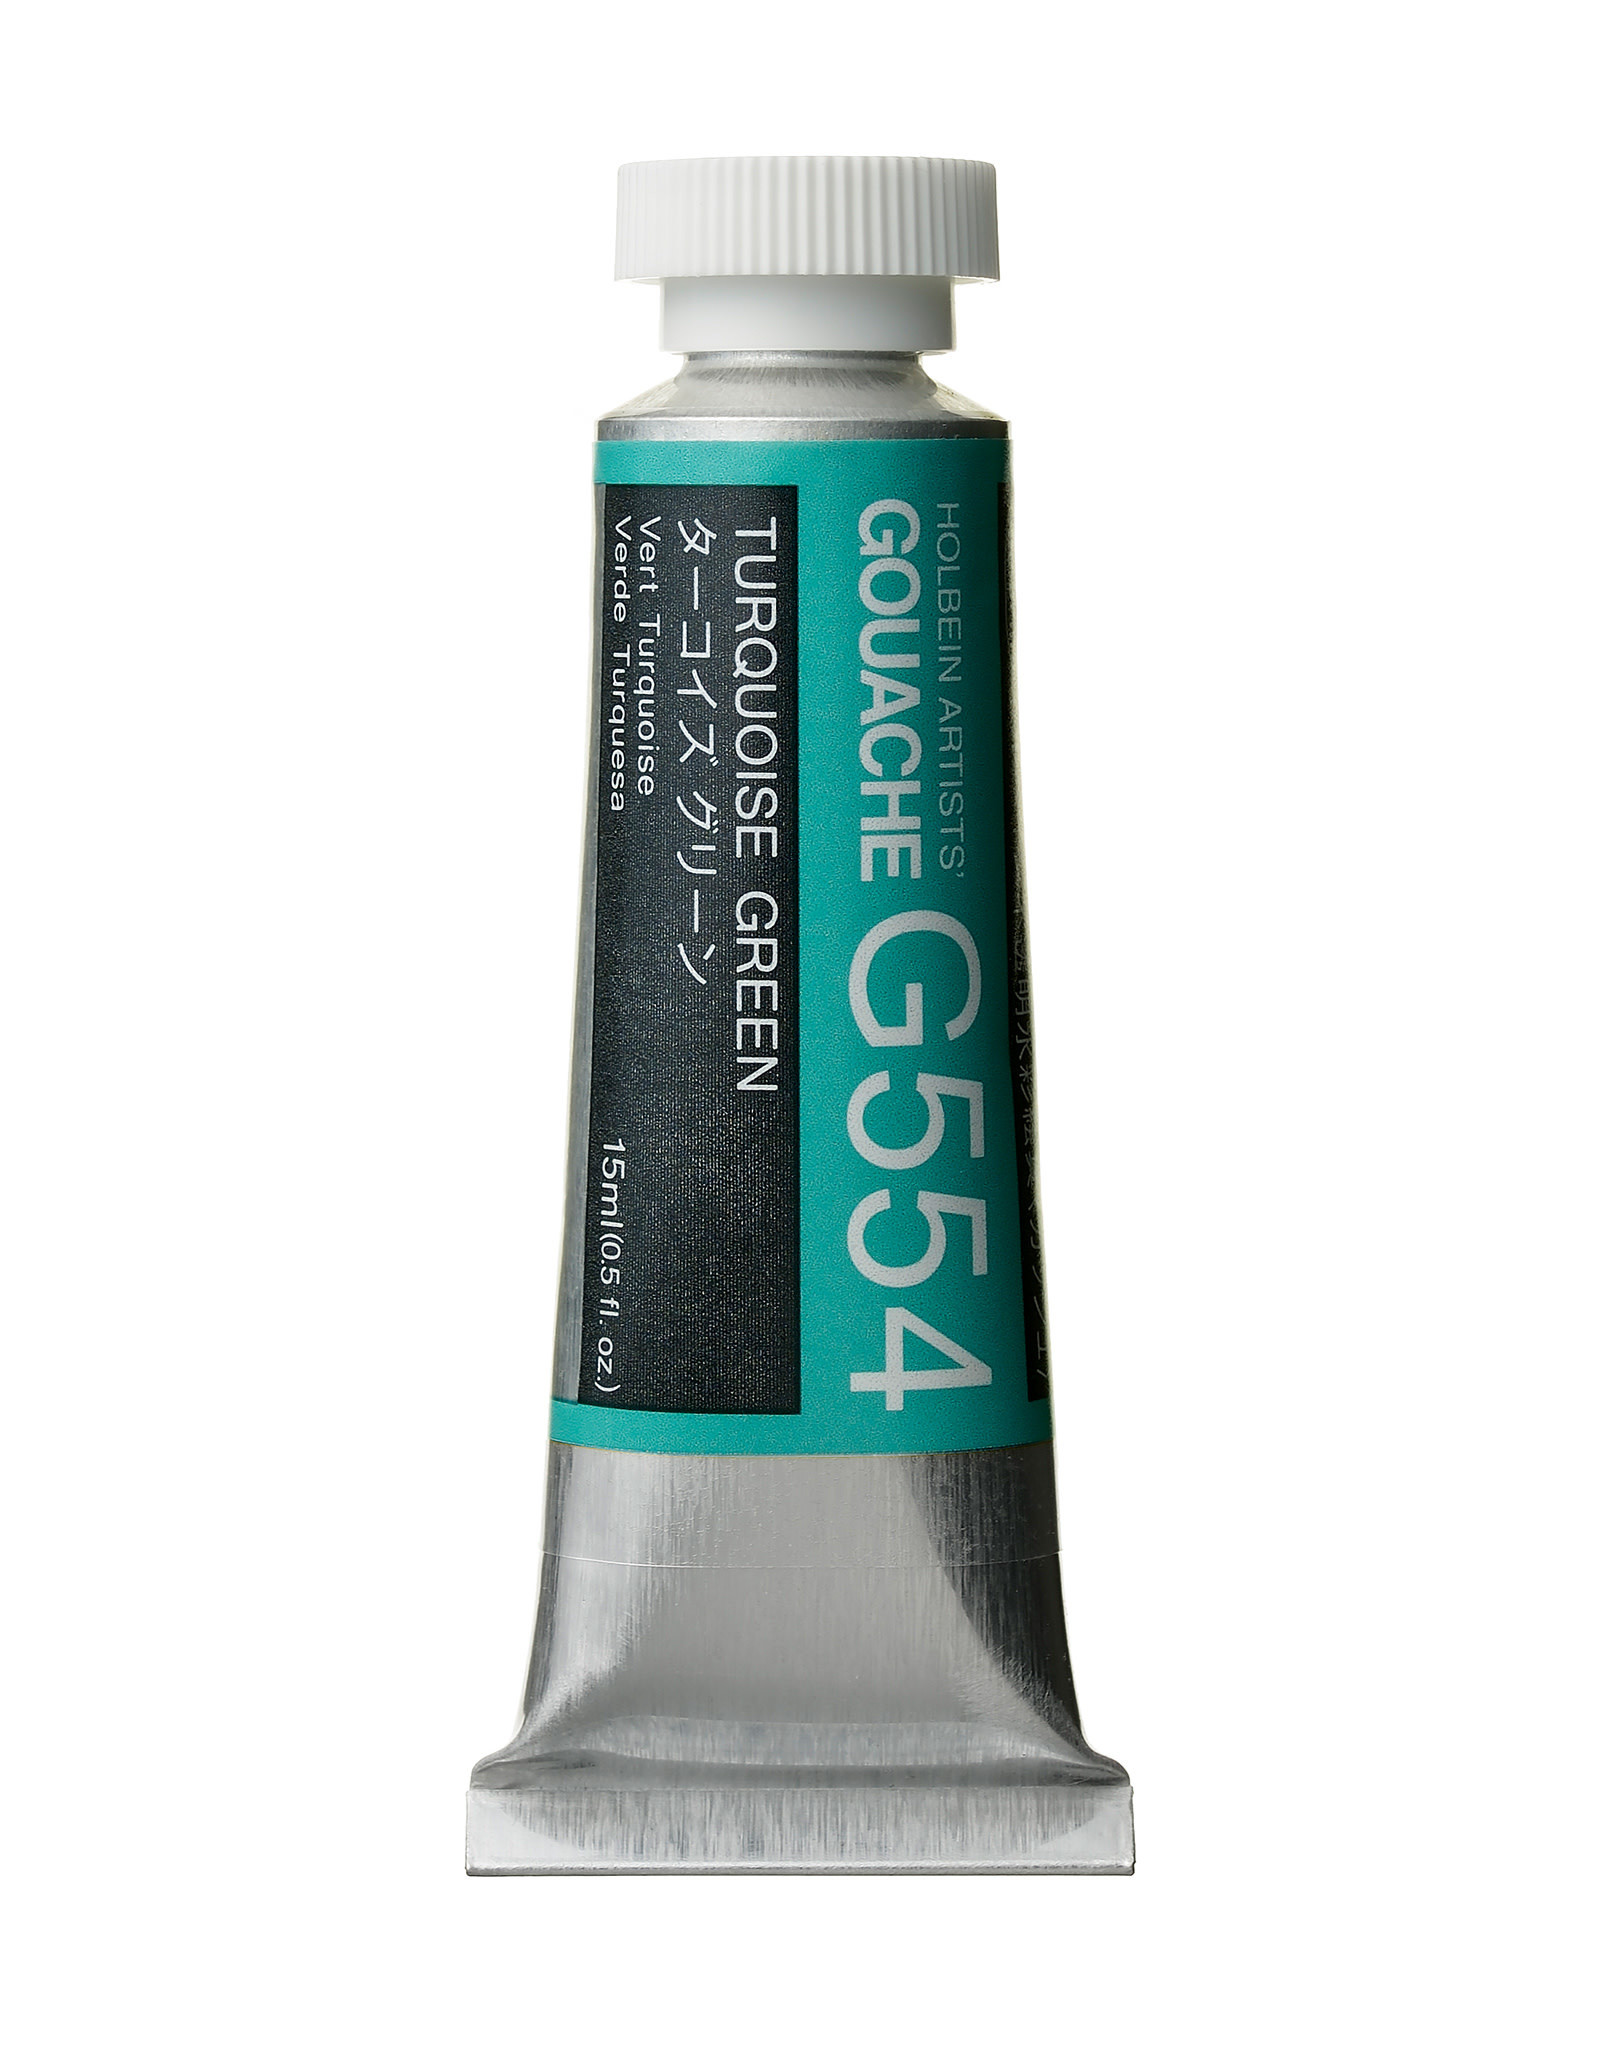 HOLBEIN Holbein Artists’ Designer Gouache, Turquoise Green 15ml